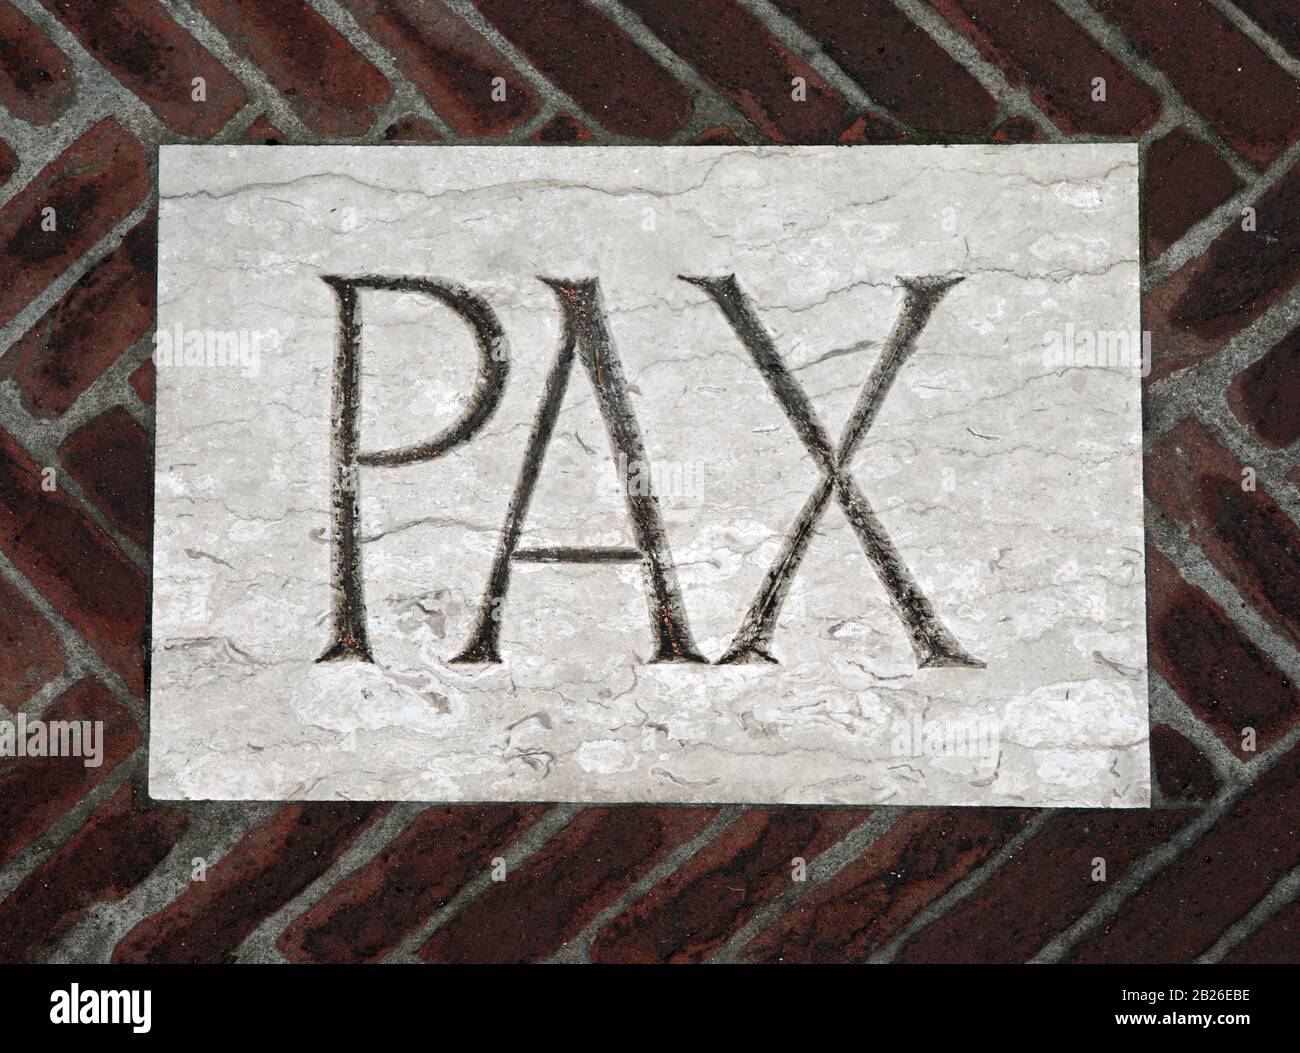 Latin writing PAX which means peace on the floor of an ancient church Stock Photo